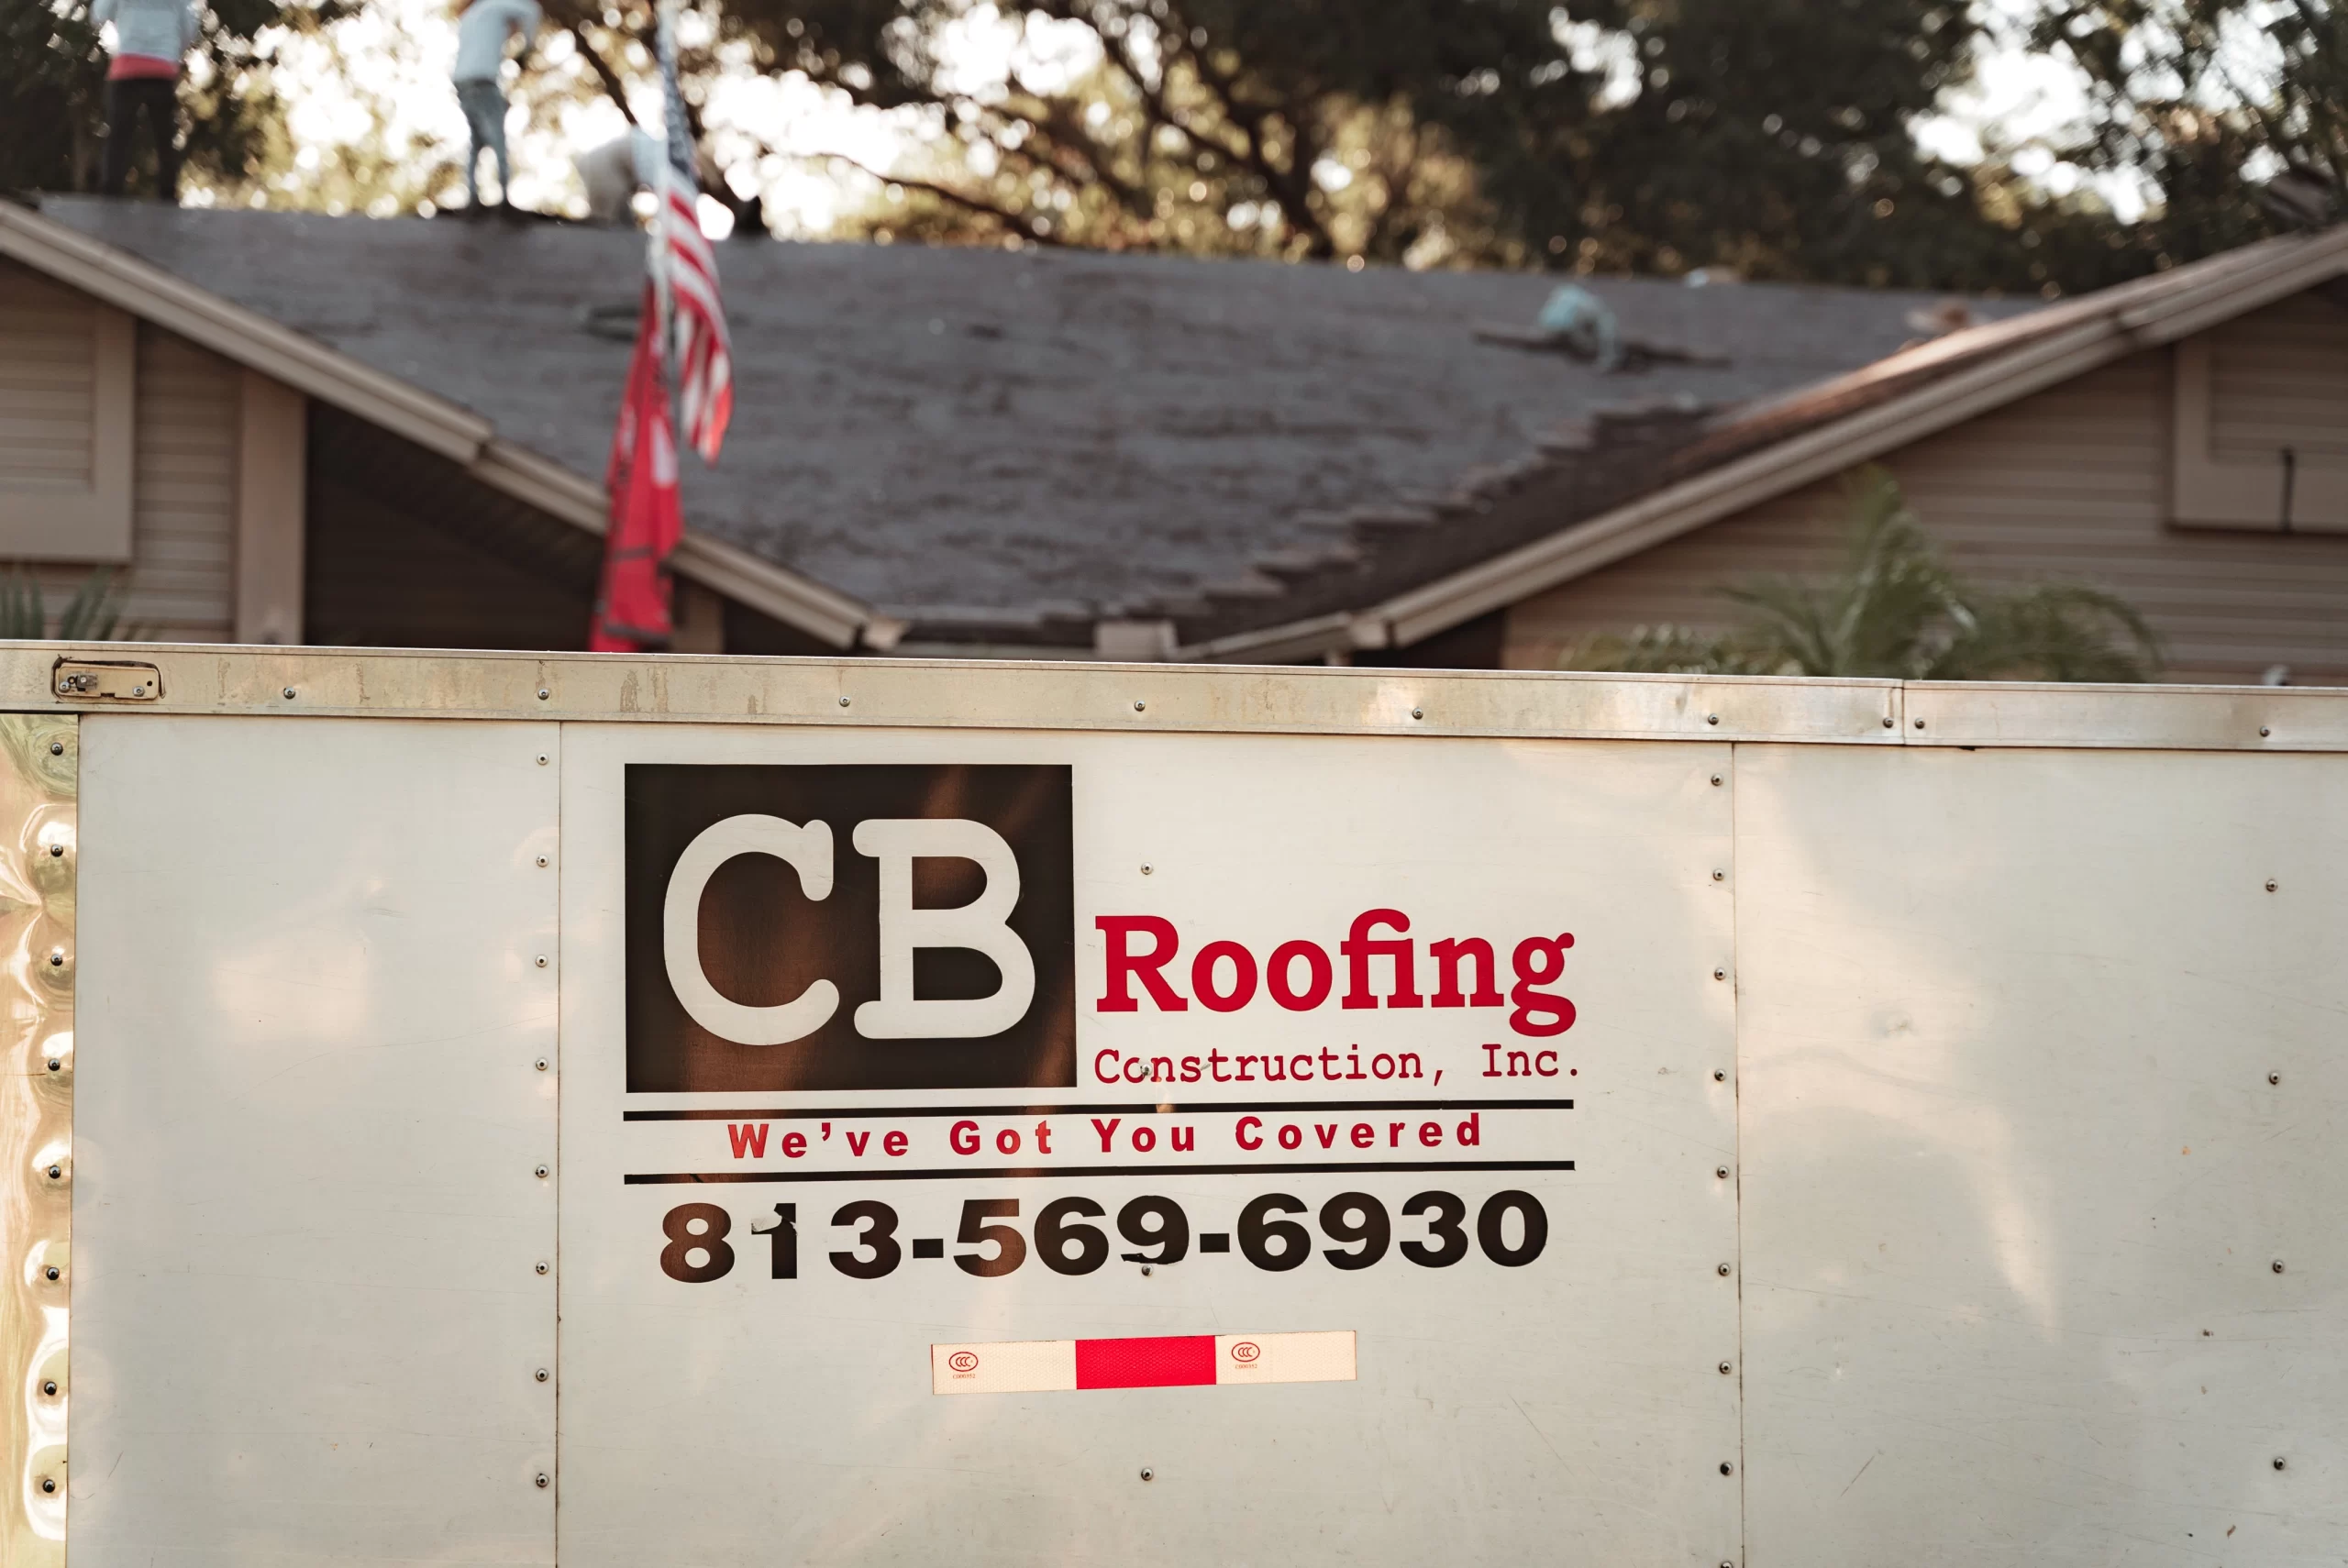 CB Roofing Construction Roofing Trailer onsite at a residential roof replacement